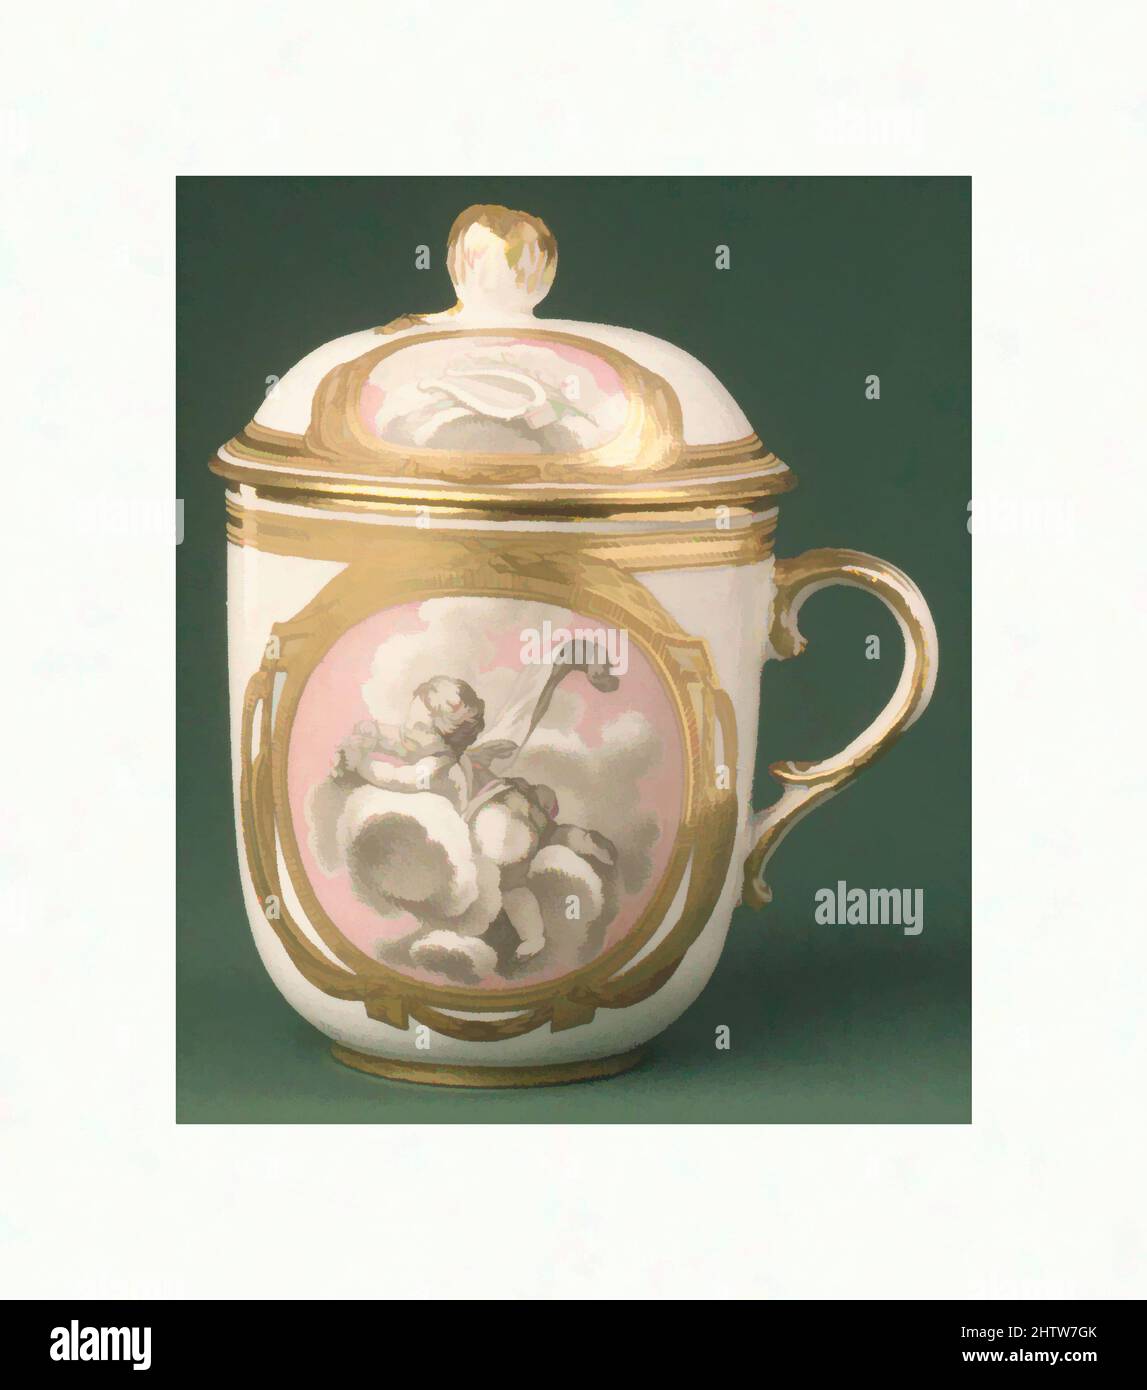 Art inspired by Cup with cover (from a tea service), ca. 1775, Russian, St. Petersburg, Hard-paste porcelain, Height: 4 1/8 in. (10.5 cm), Ceramics-Porcelain, Similar porcelain services—either the so-called tête-à-tête (for two persons) or the egoist type (for a single user)—were, Classic works modernized by Artotop with a splash of modernity. Shapes, color and value, eye-catching visual impact on art. Emotions through freedom of artworks in a contemporary way. A timeless message pursuing a wildly creative new direction. Artists turning to the digital medium and creating the Artotop NFT Stock Photo